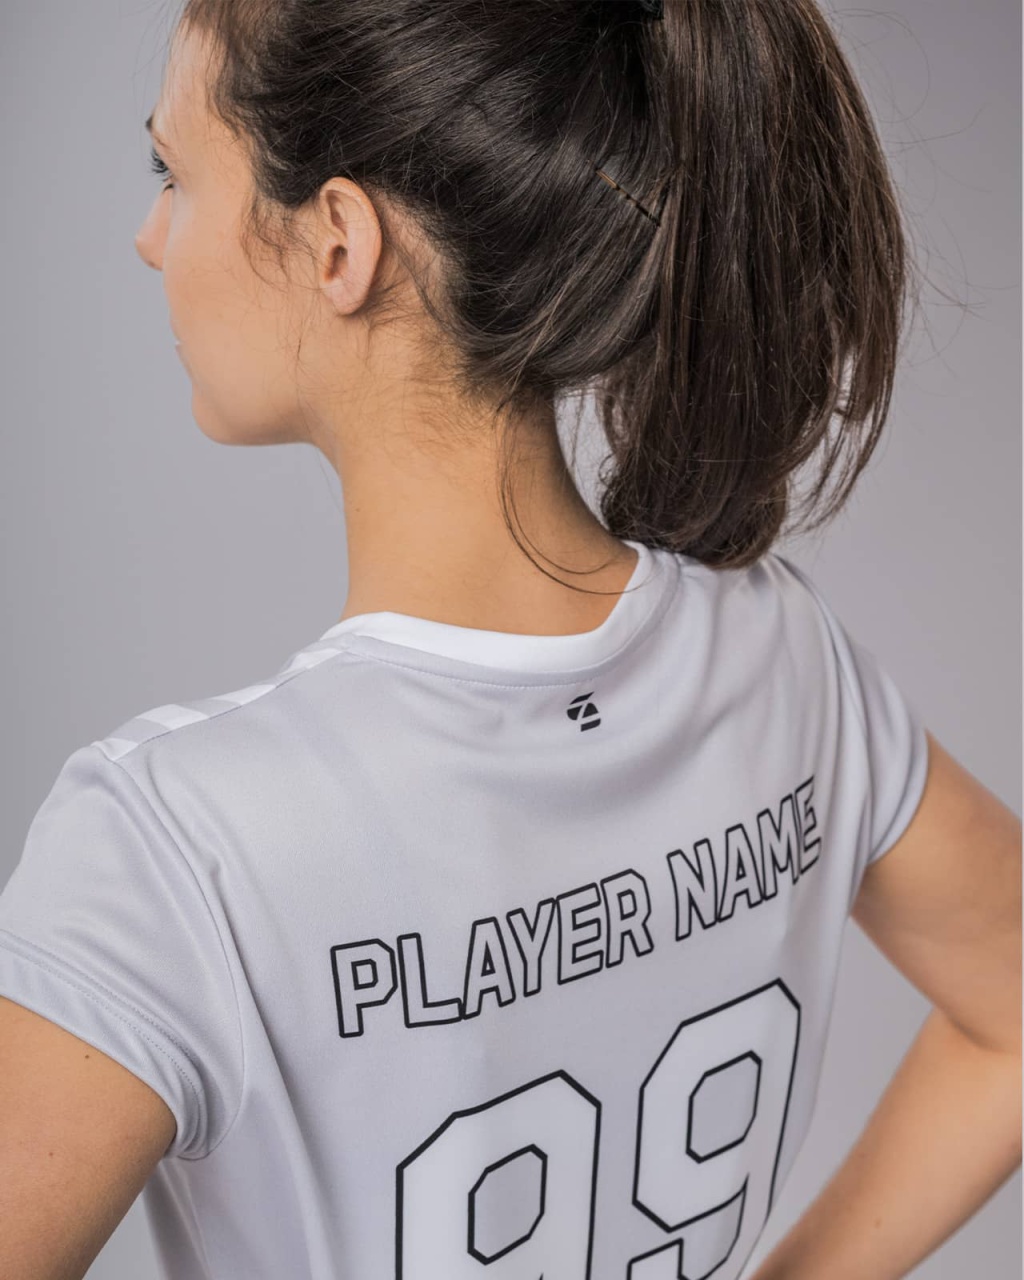 Ace women's volleyball jersey